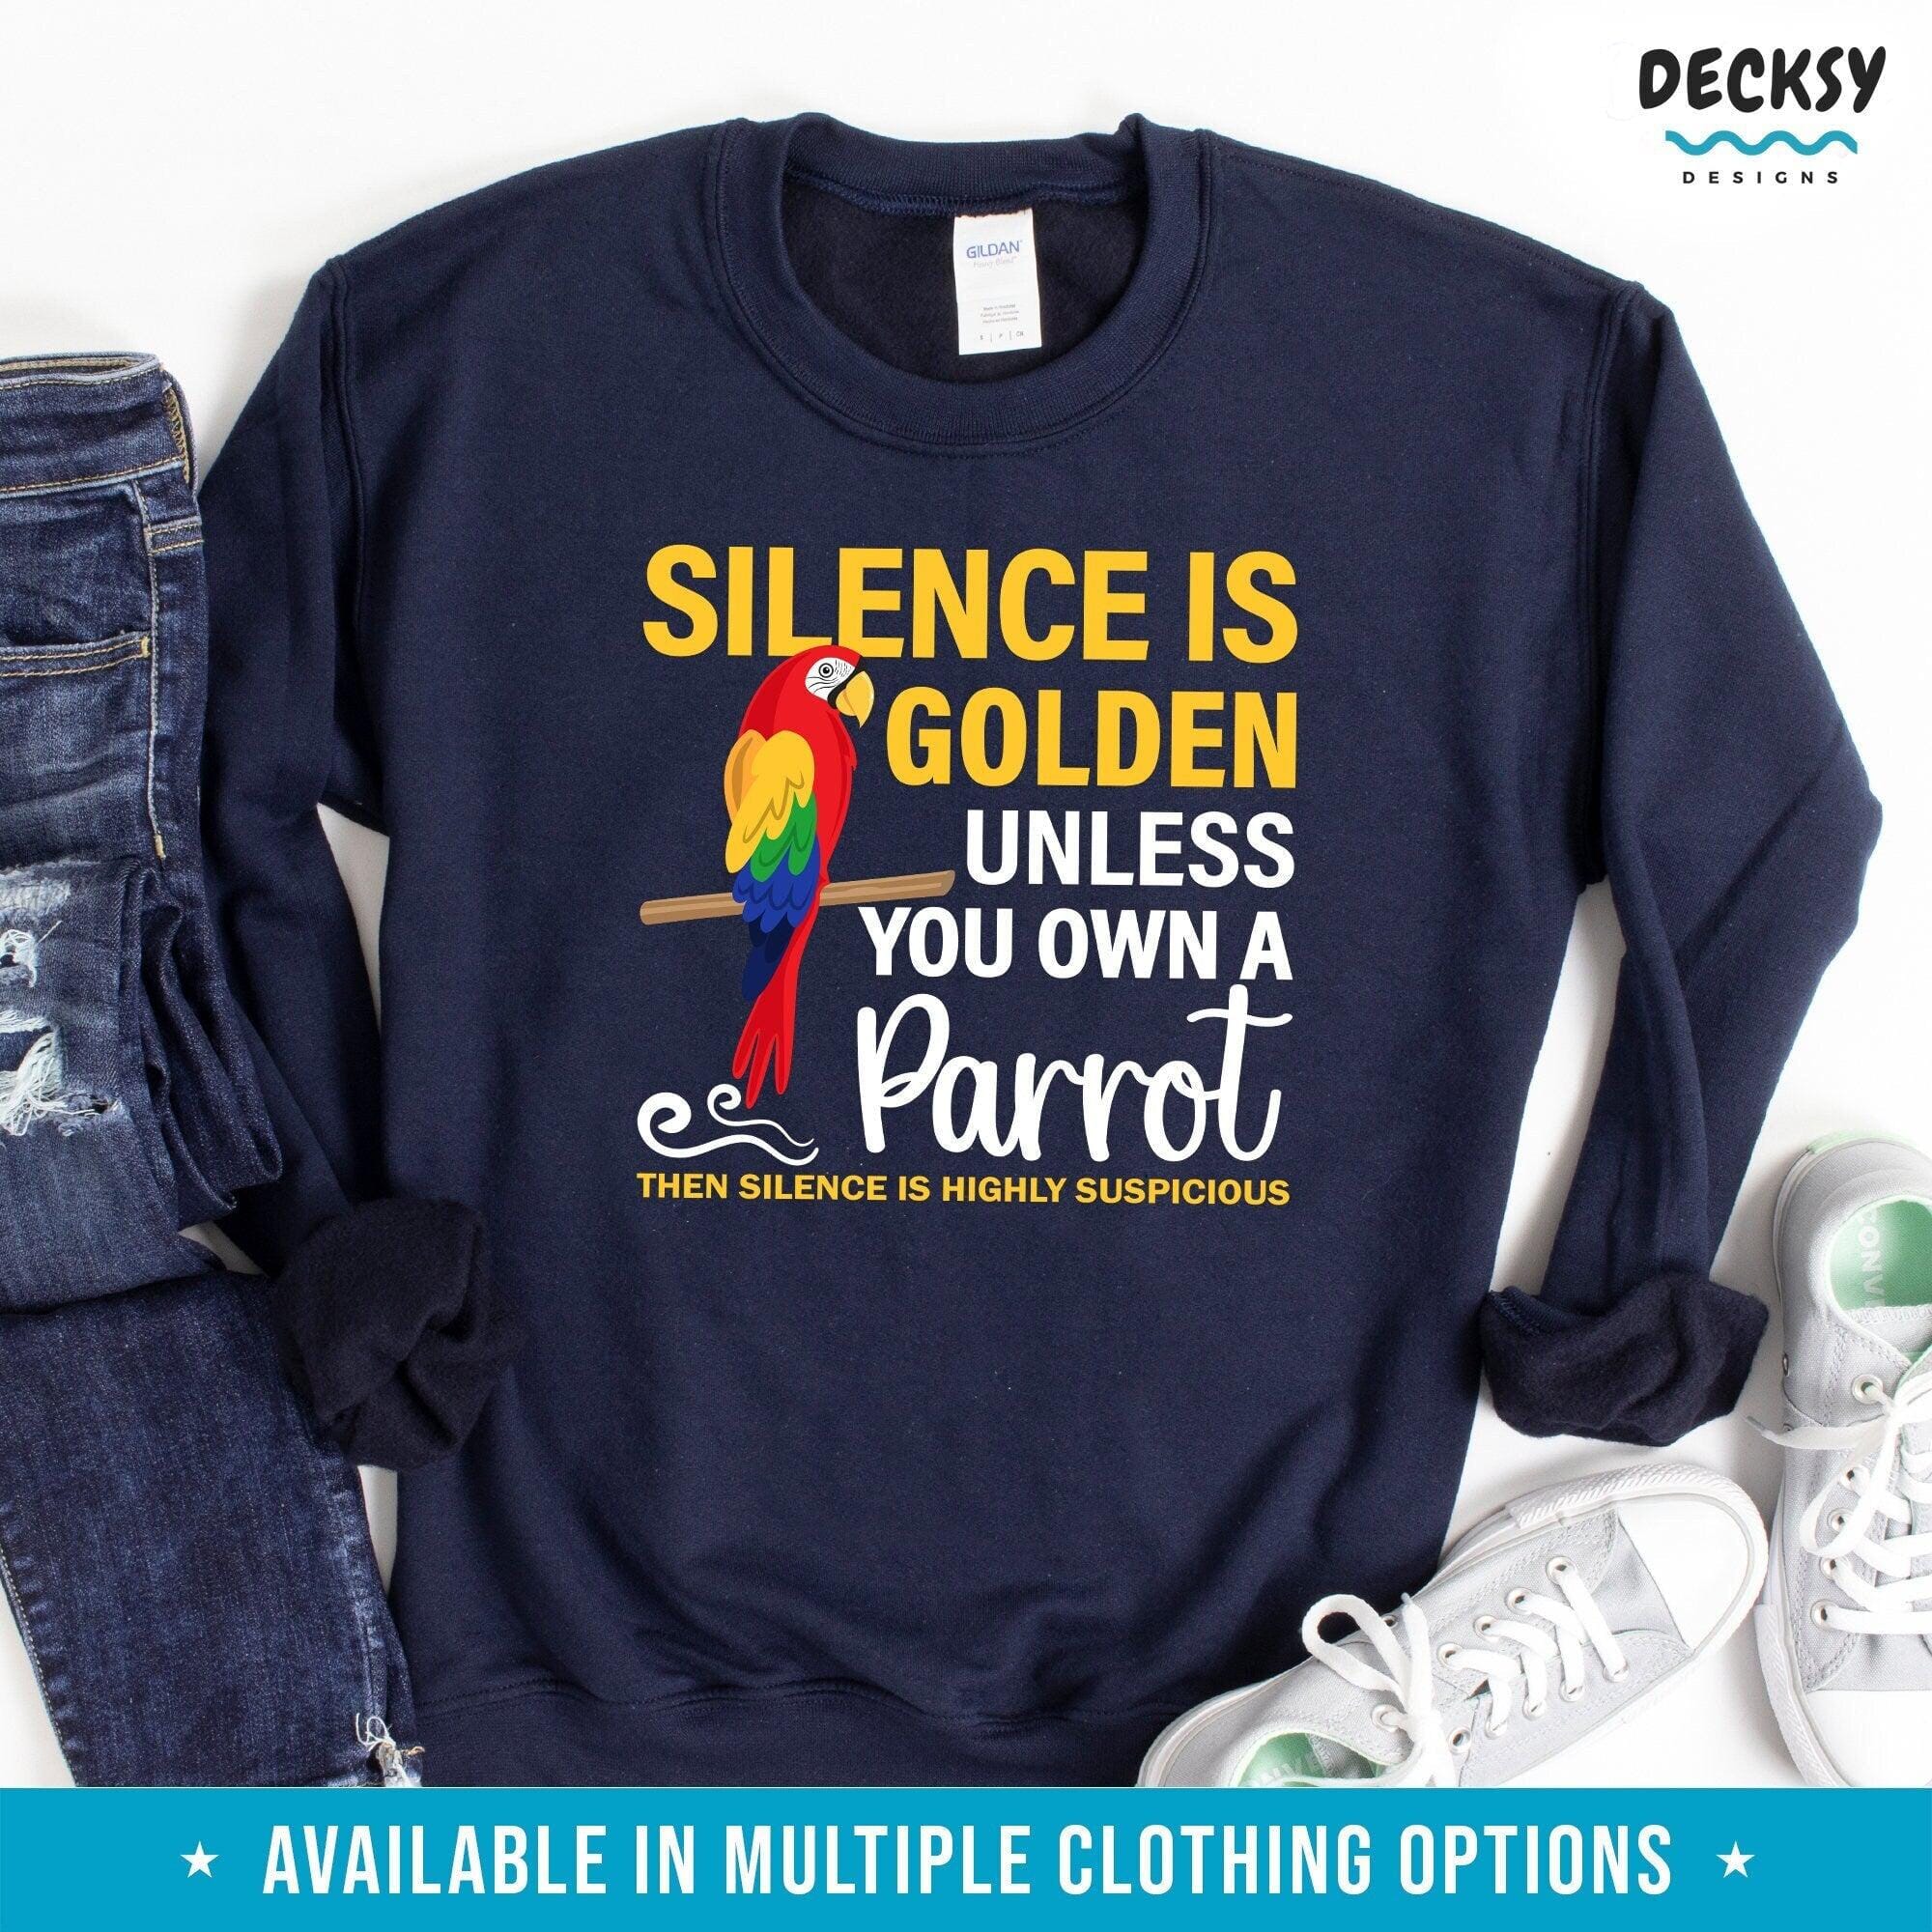 Parrot Shirt, Bird Lover Gift-Clothing:Gender-Neutral Adult Clothing:Tops & Tees:T-shirts:Graphic Tees-DecksyDesigns